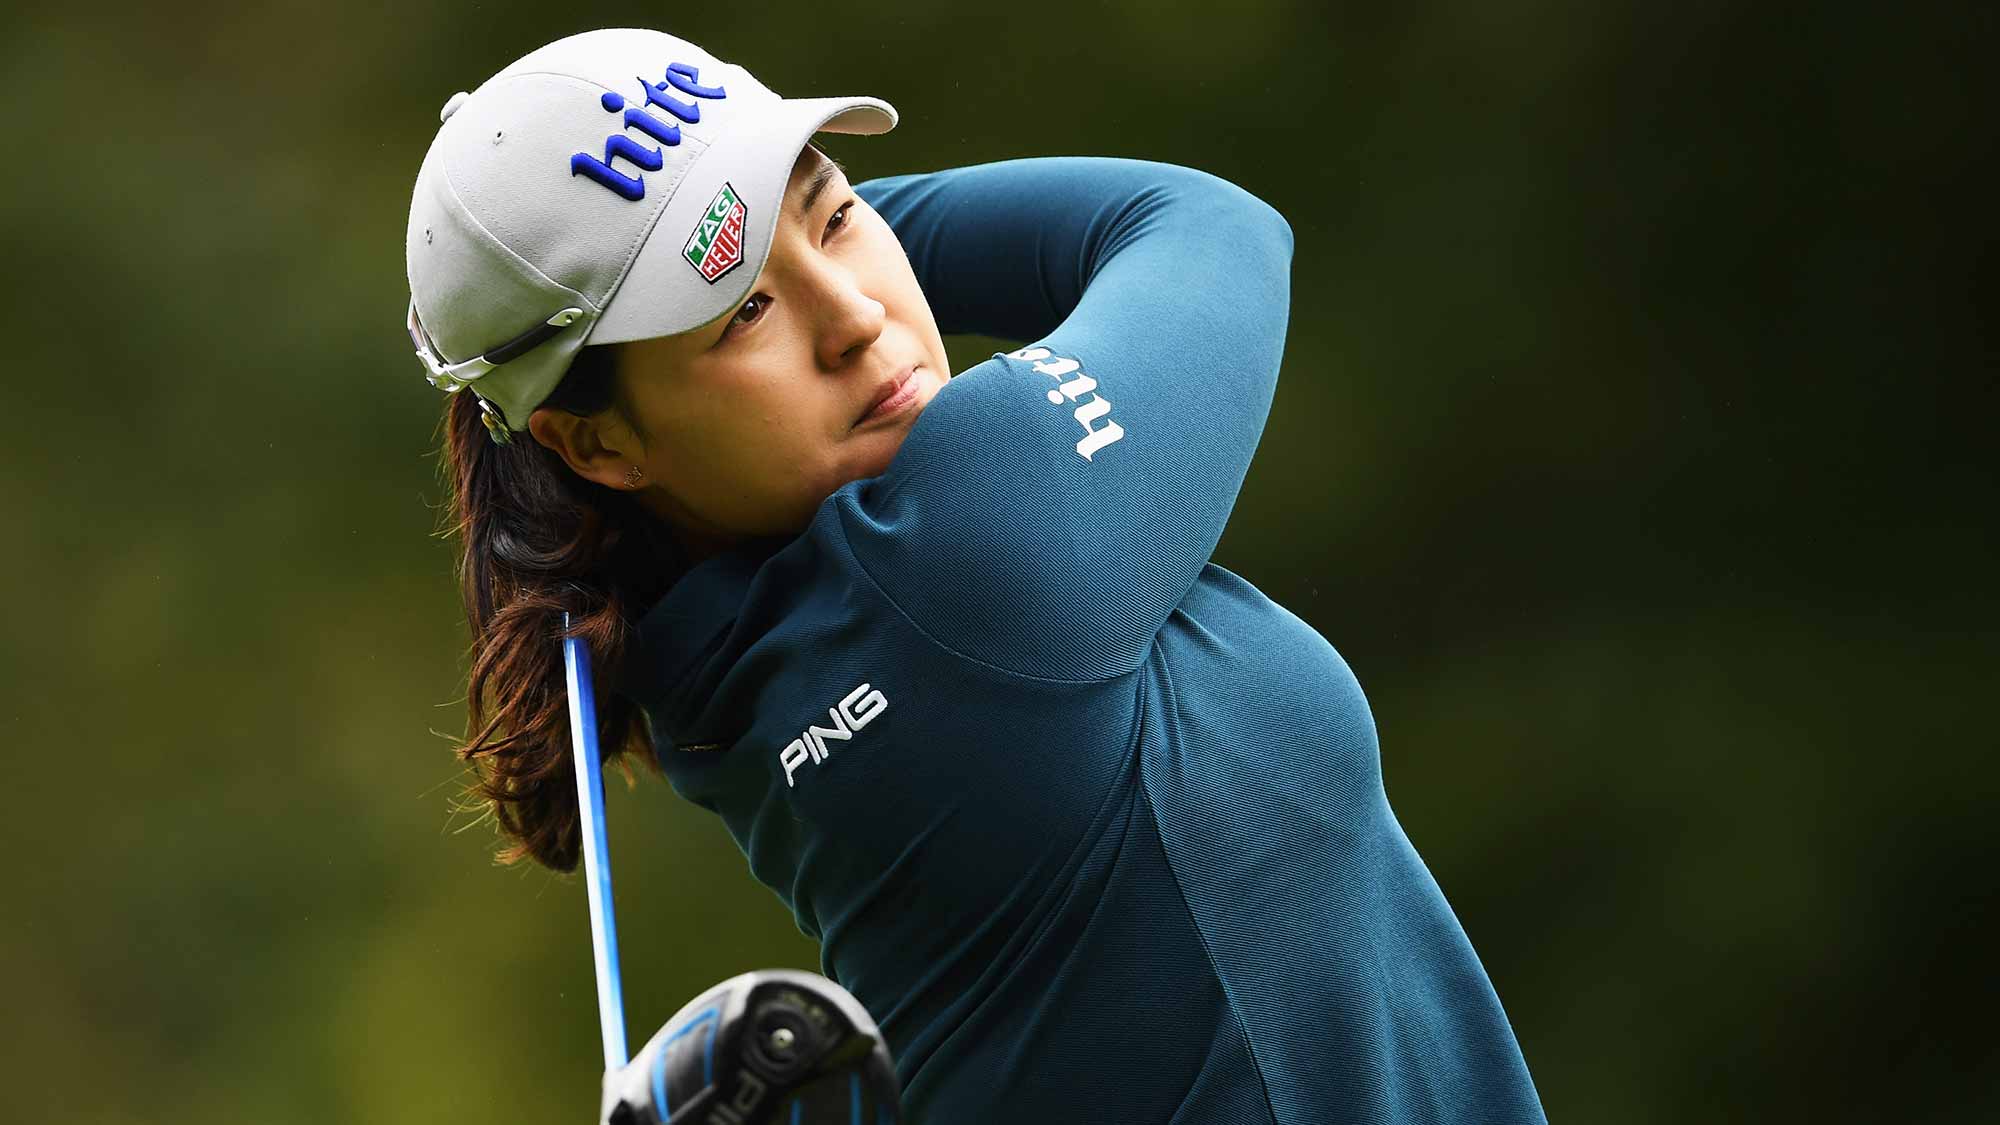  In Gee Chun of Korea plays a shot during the third round of The Evian Championship